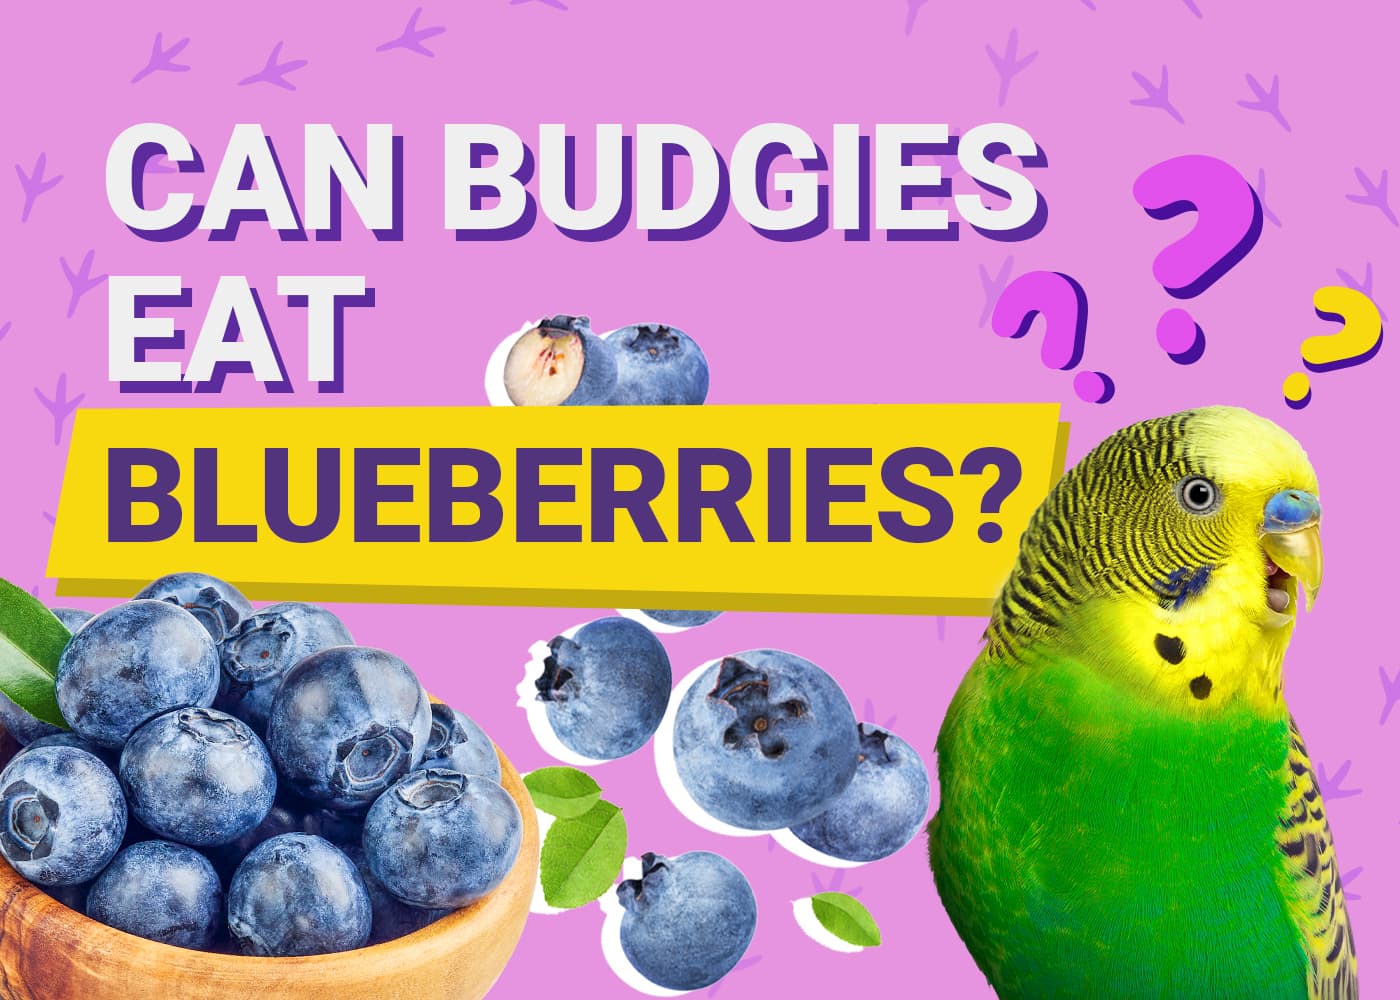 Can Budgies Eat Blueberries? A Veterinarian's Opinion